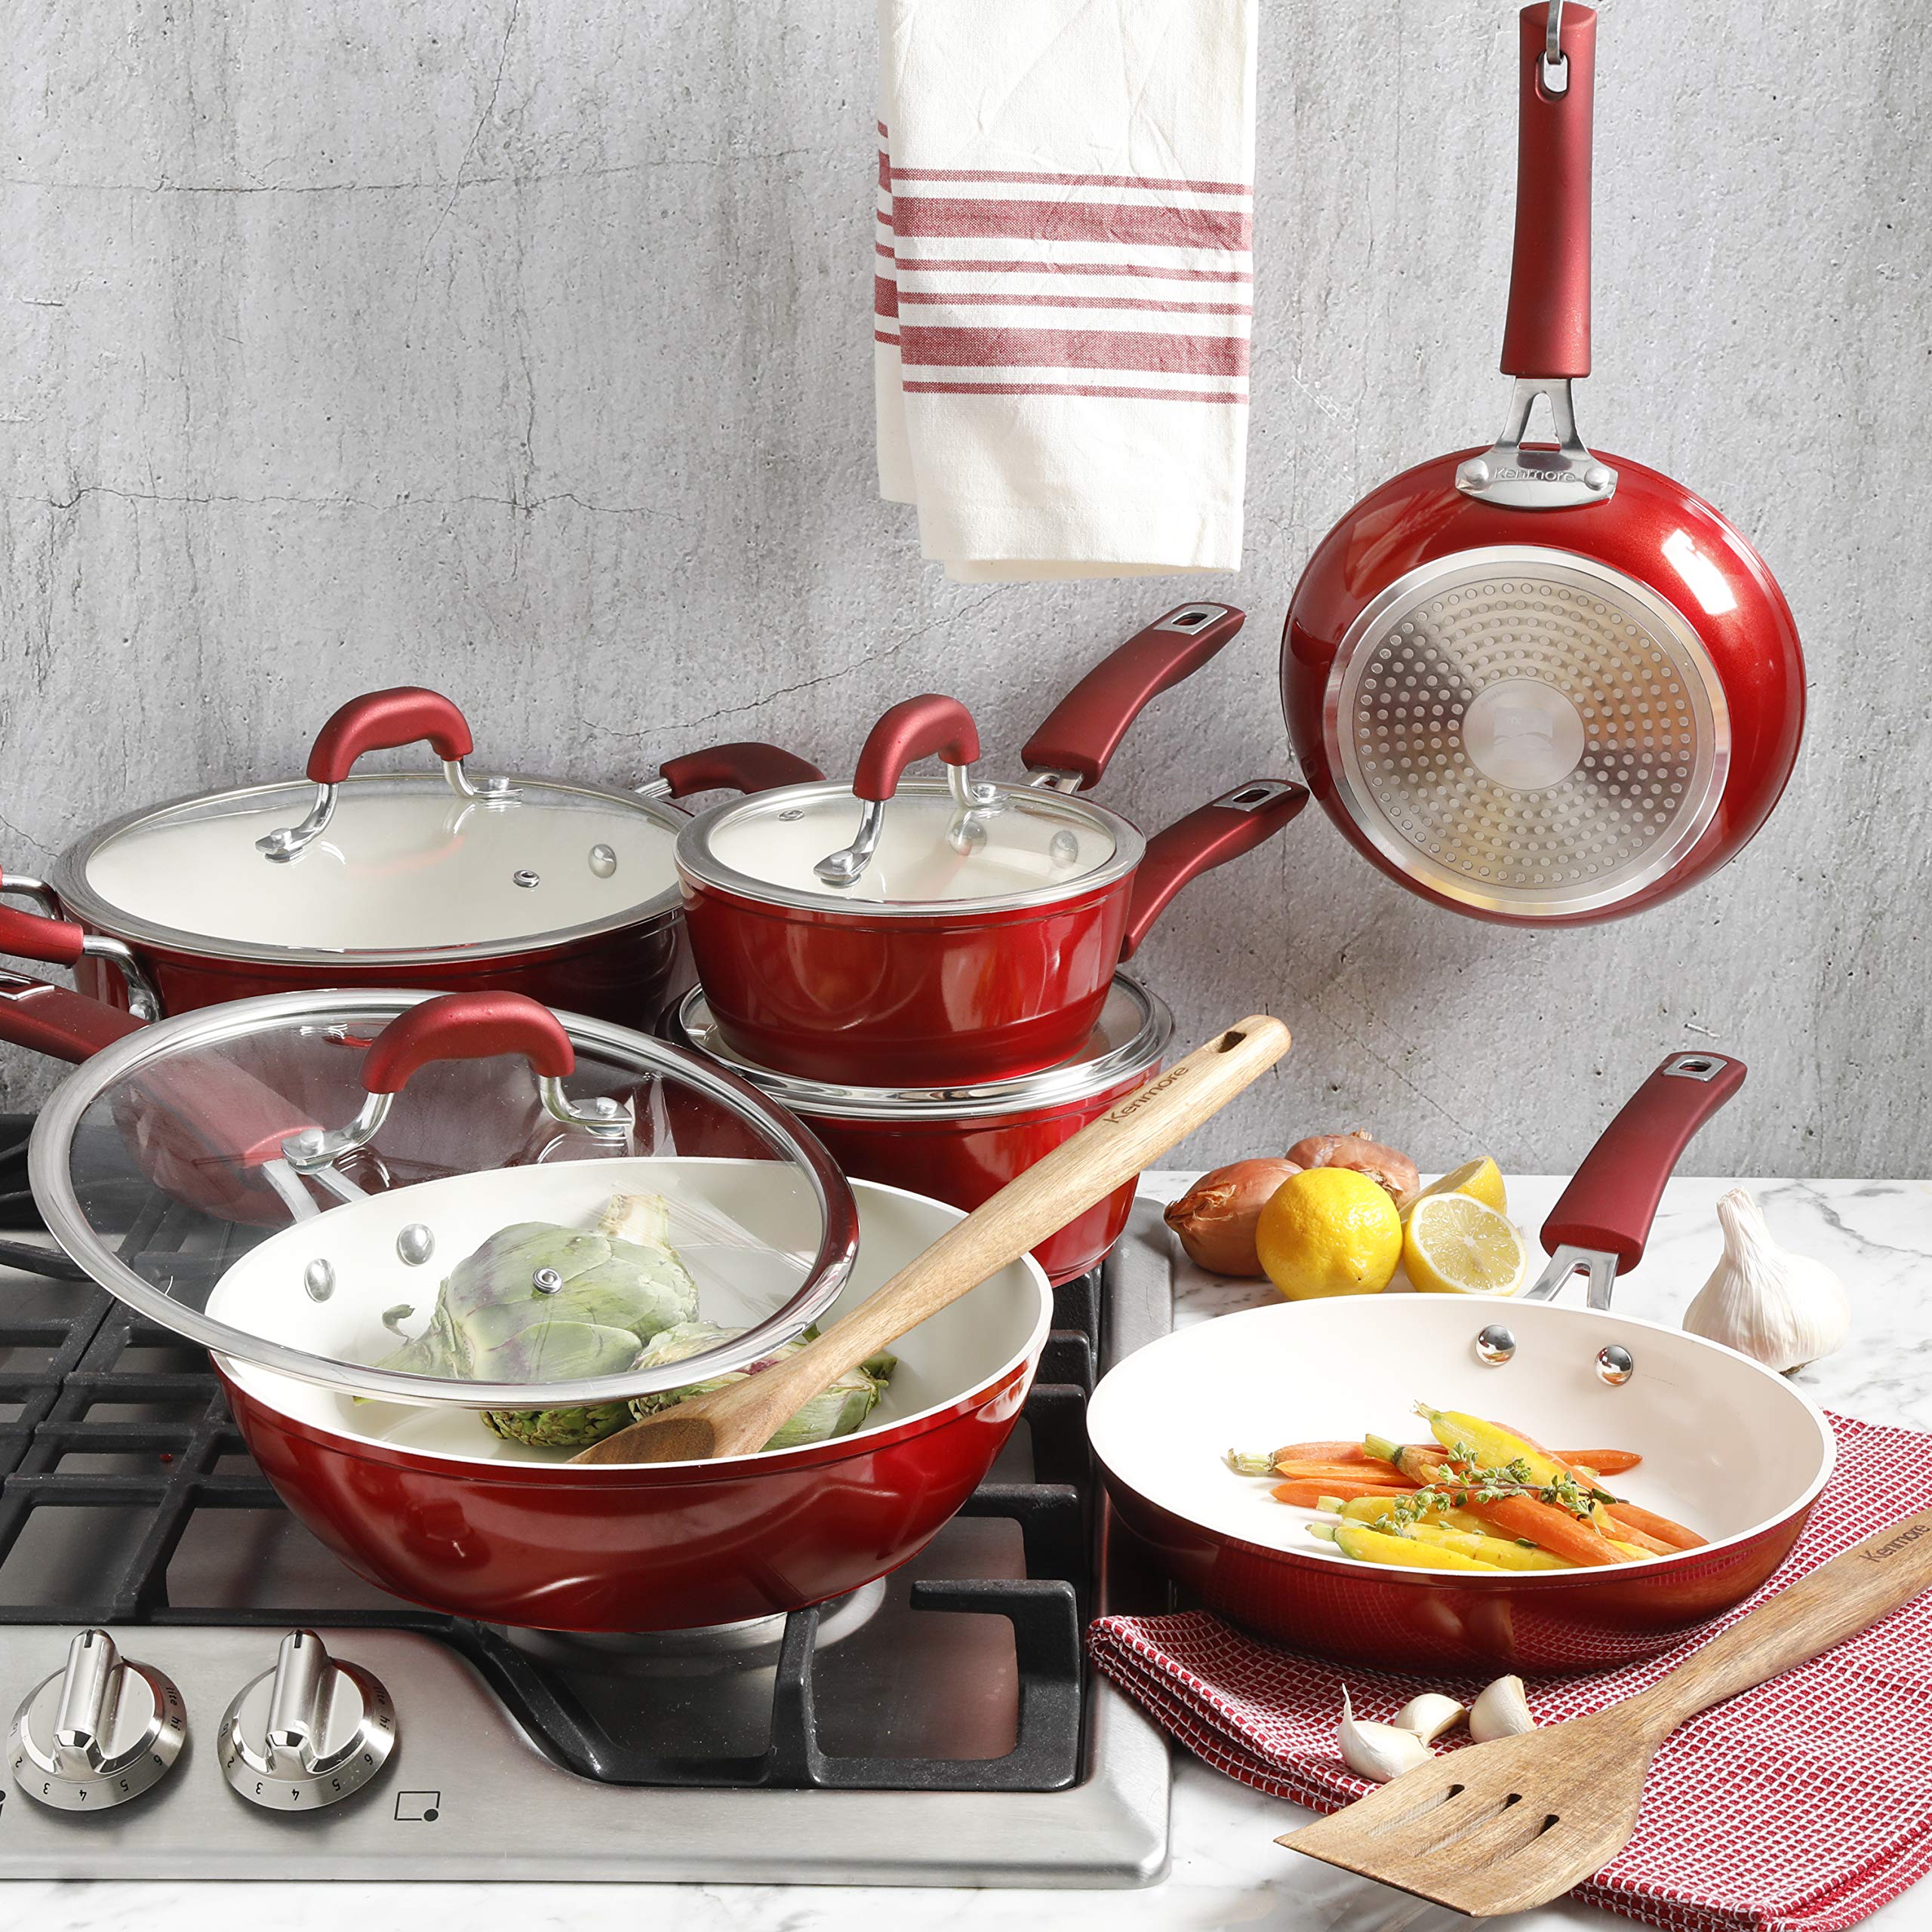 Kenmore Nonstick Ceramic Coated Forged Aluminum Induction Cookware, 2PC - Fry Pan Set, Metallic Red